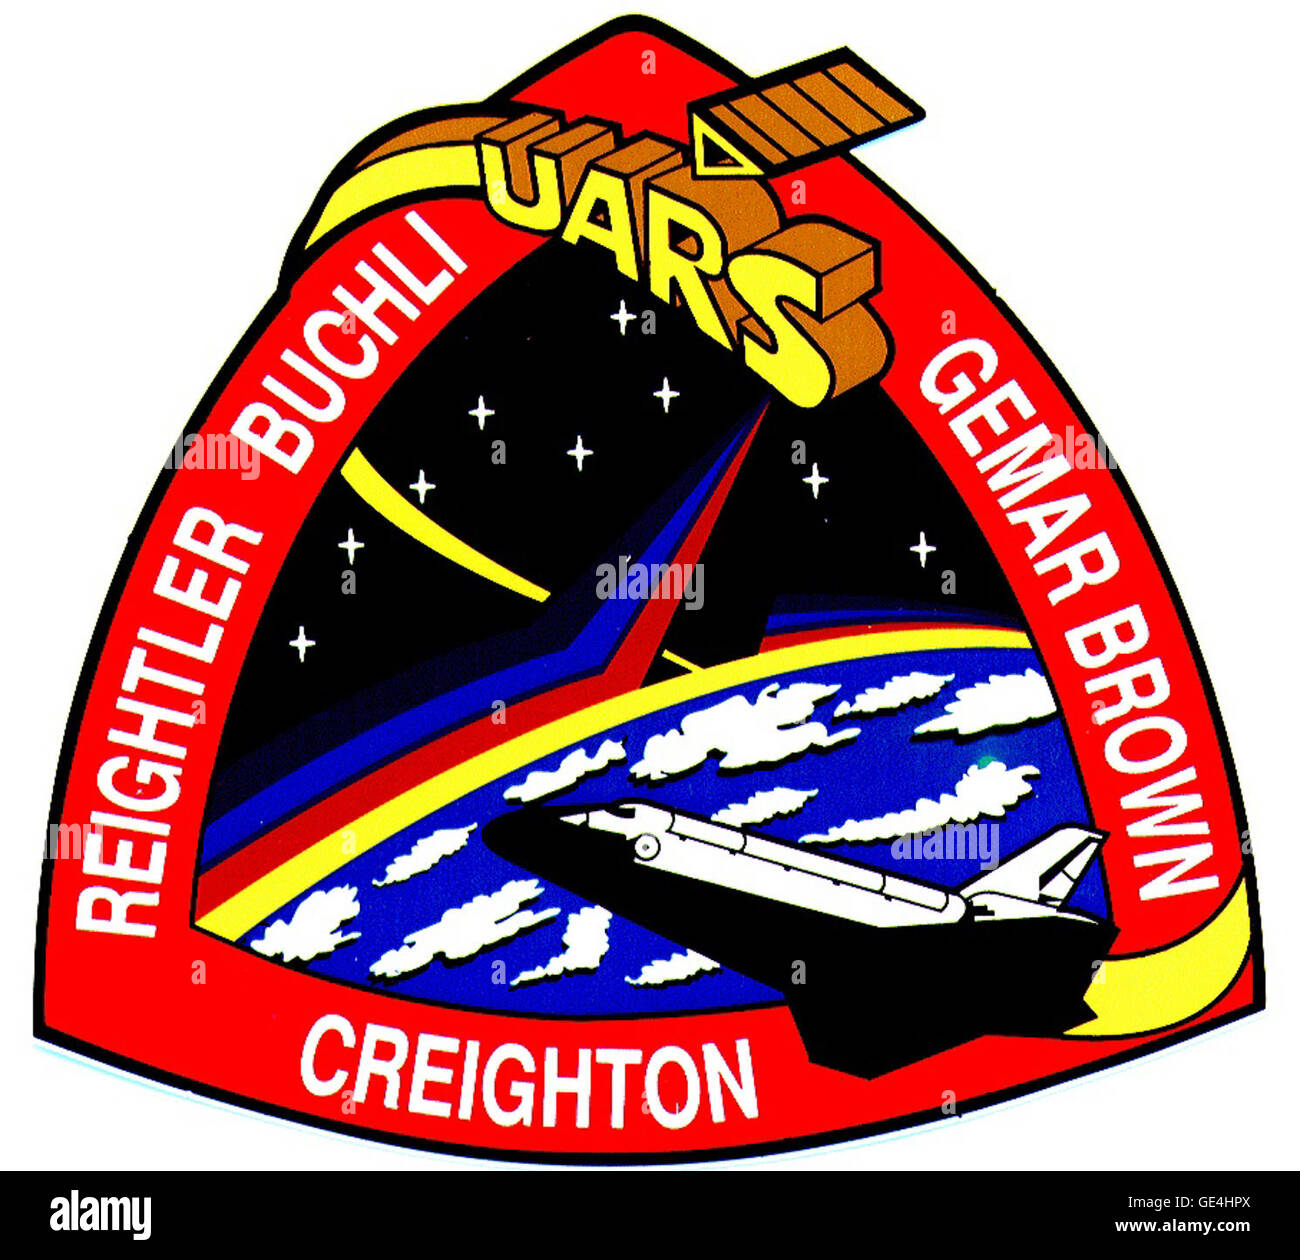 Launch: September 12, 1991  Landing: September 18, 1991 Edwards Air Force Base, Cal. Astronauts: John O. Creighton, Kenneth S. Reightler, Jr., Mark N. Brown, Charles D. Gemar and James F. Buchli Space Shuttle: Discovery The primary payload, the Upper Atmosphere Research Satellite (UARS), was deployed on the third day of the mission. It was used to study the Earth’s troposphere.   www.nasa.gov/mission pages/shuttle/shuttlemissions/archiv... ( http://www.nasa.gov/mission pages/shuttle/shuttlemissions/archives/sts-48.html ) Stock Photo